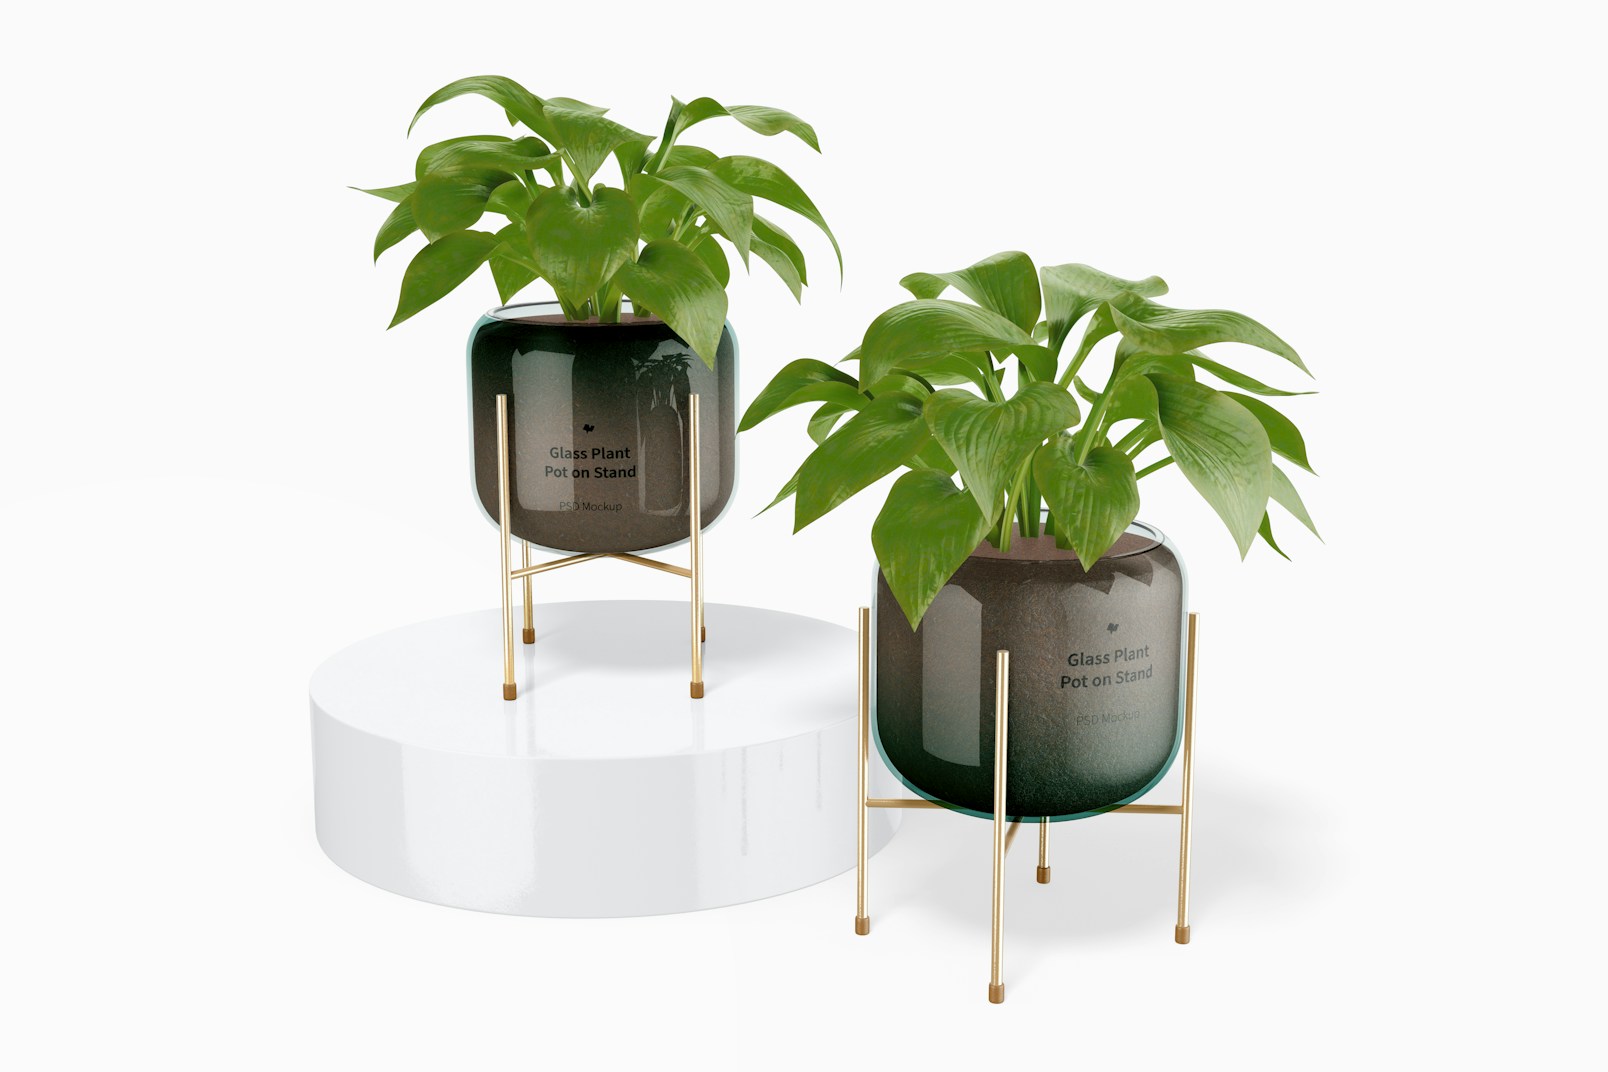 Glass Plant Pots on Stand Mockup, Front View